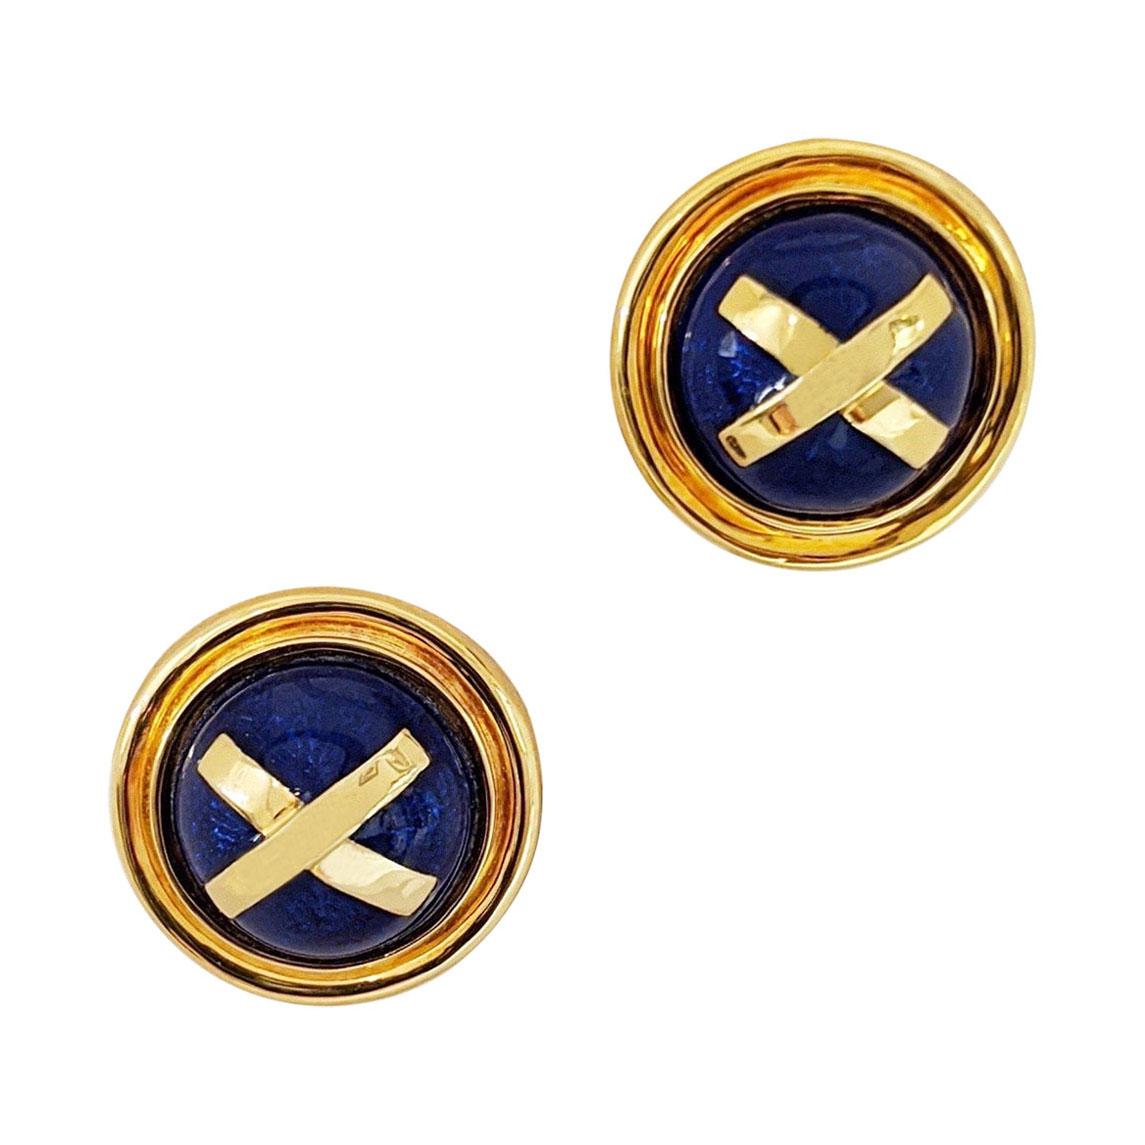 Cellini Jewelers 18 Karat Gold Earrings with Blue Enamel and Yellow Gold "X" For Sale